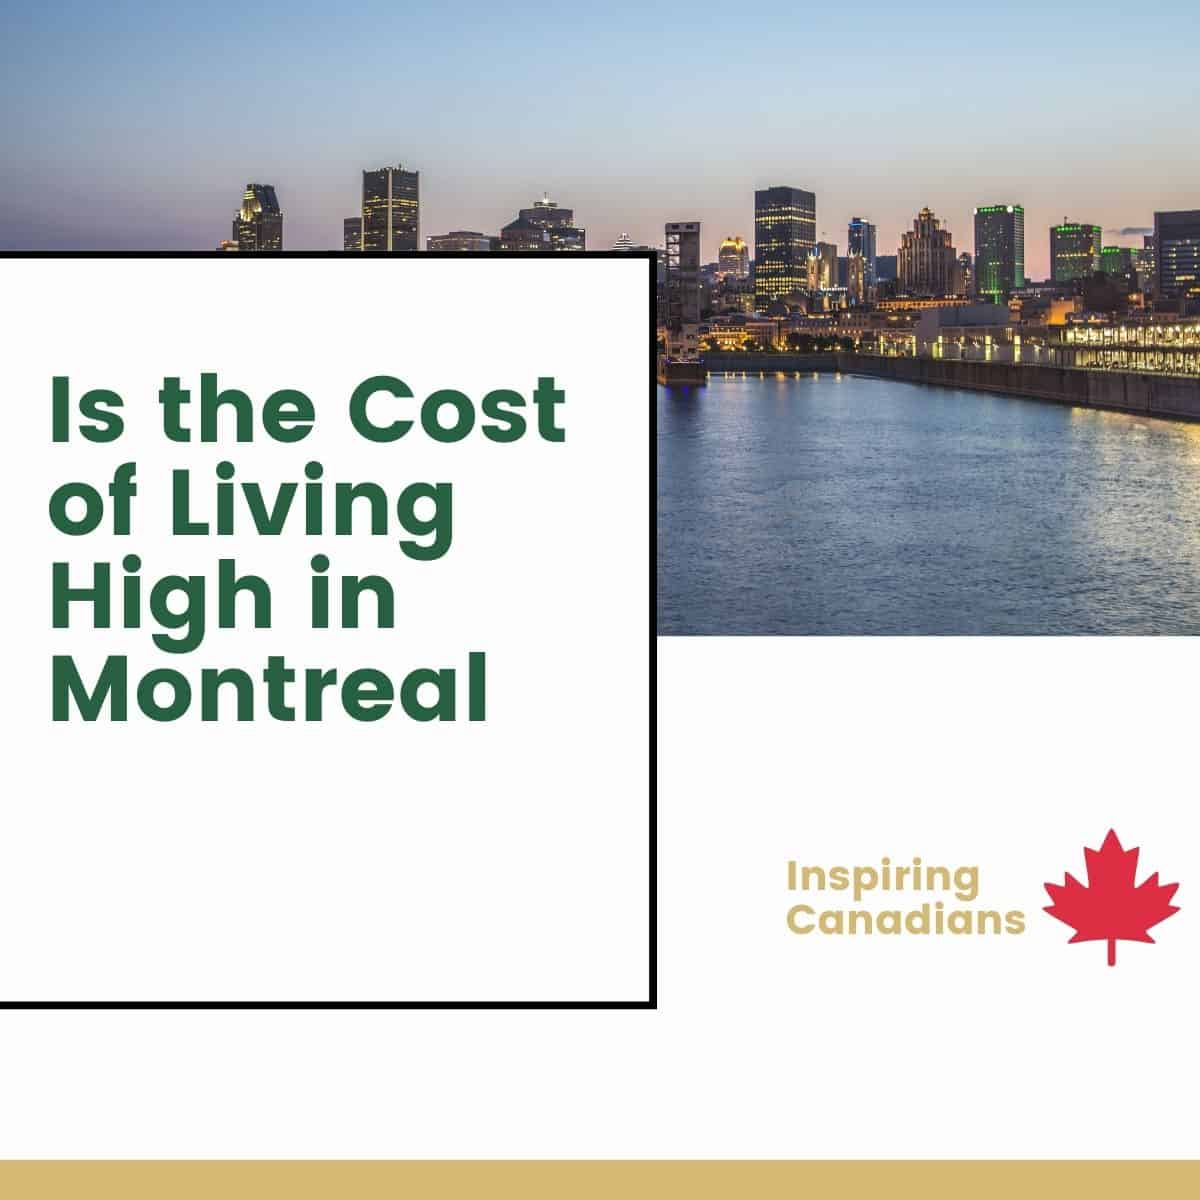 Is the Cost of Living High in Montreal?